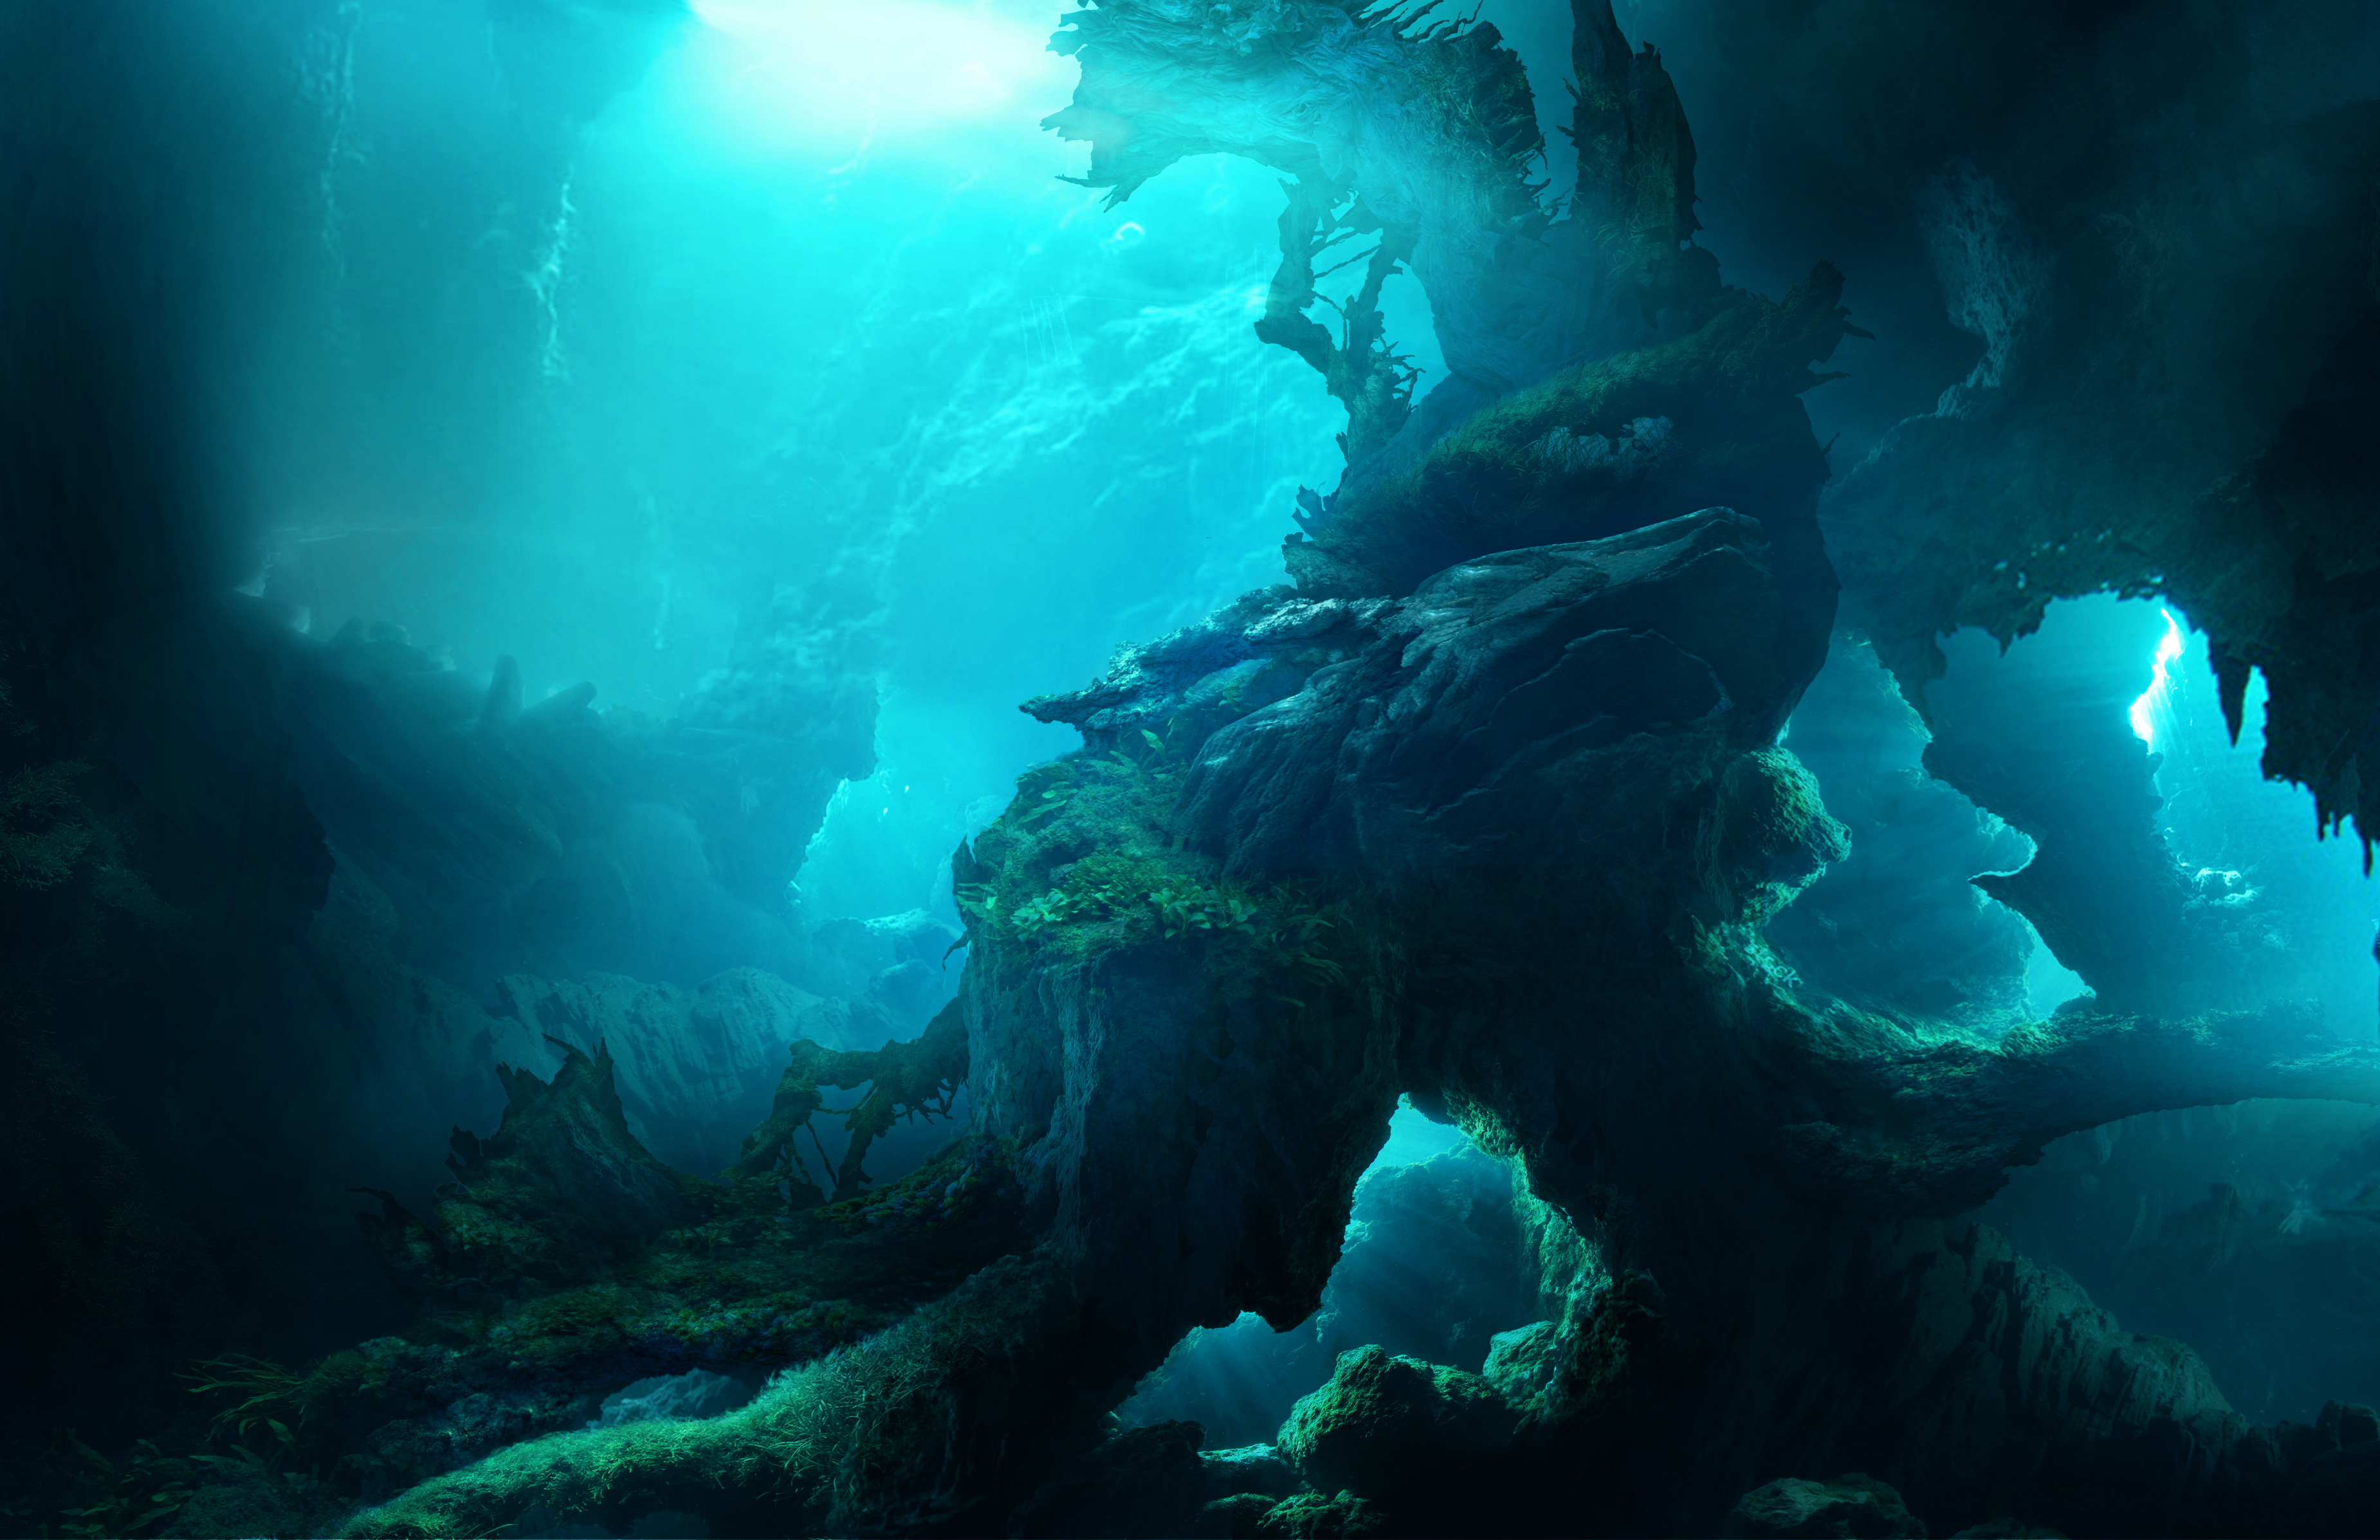 Fantasy Cave HD Wallpaper | Background Image